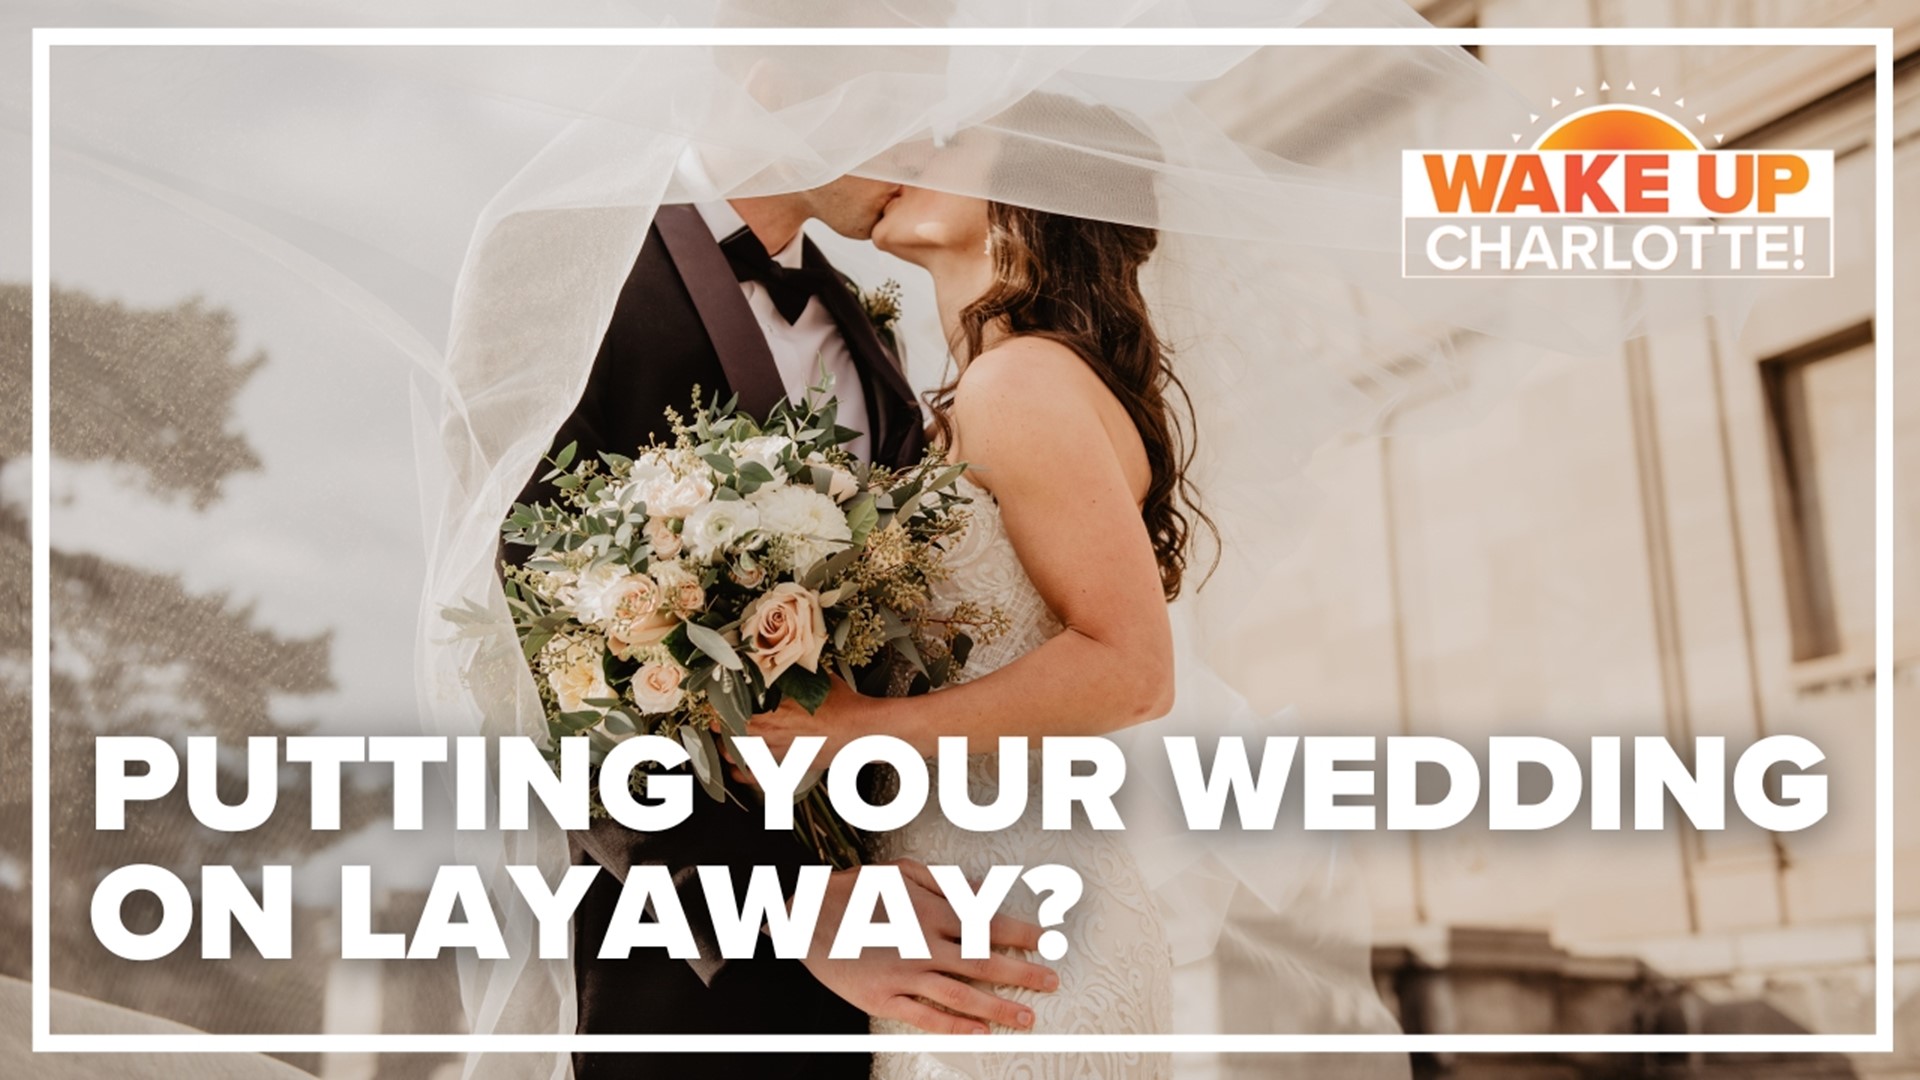 We all know weddings get expensive, but now couples have a new option when it comes to paying